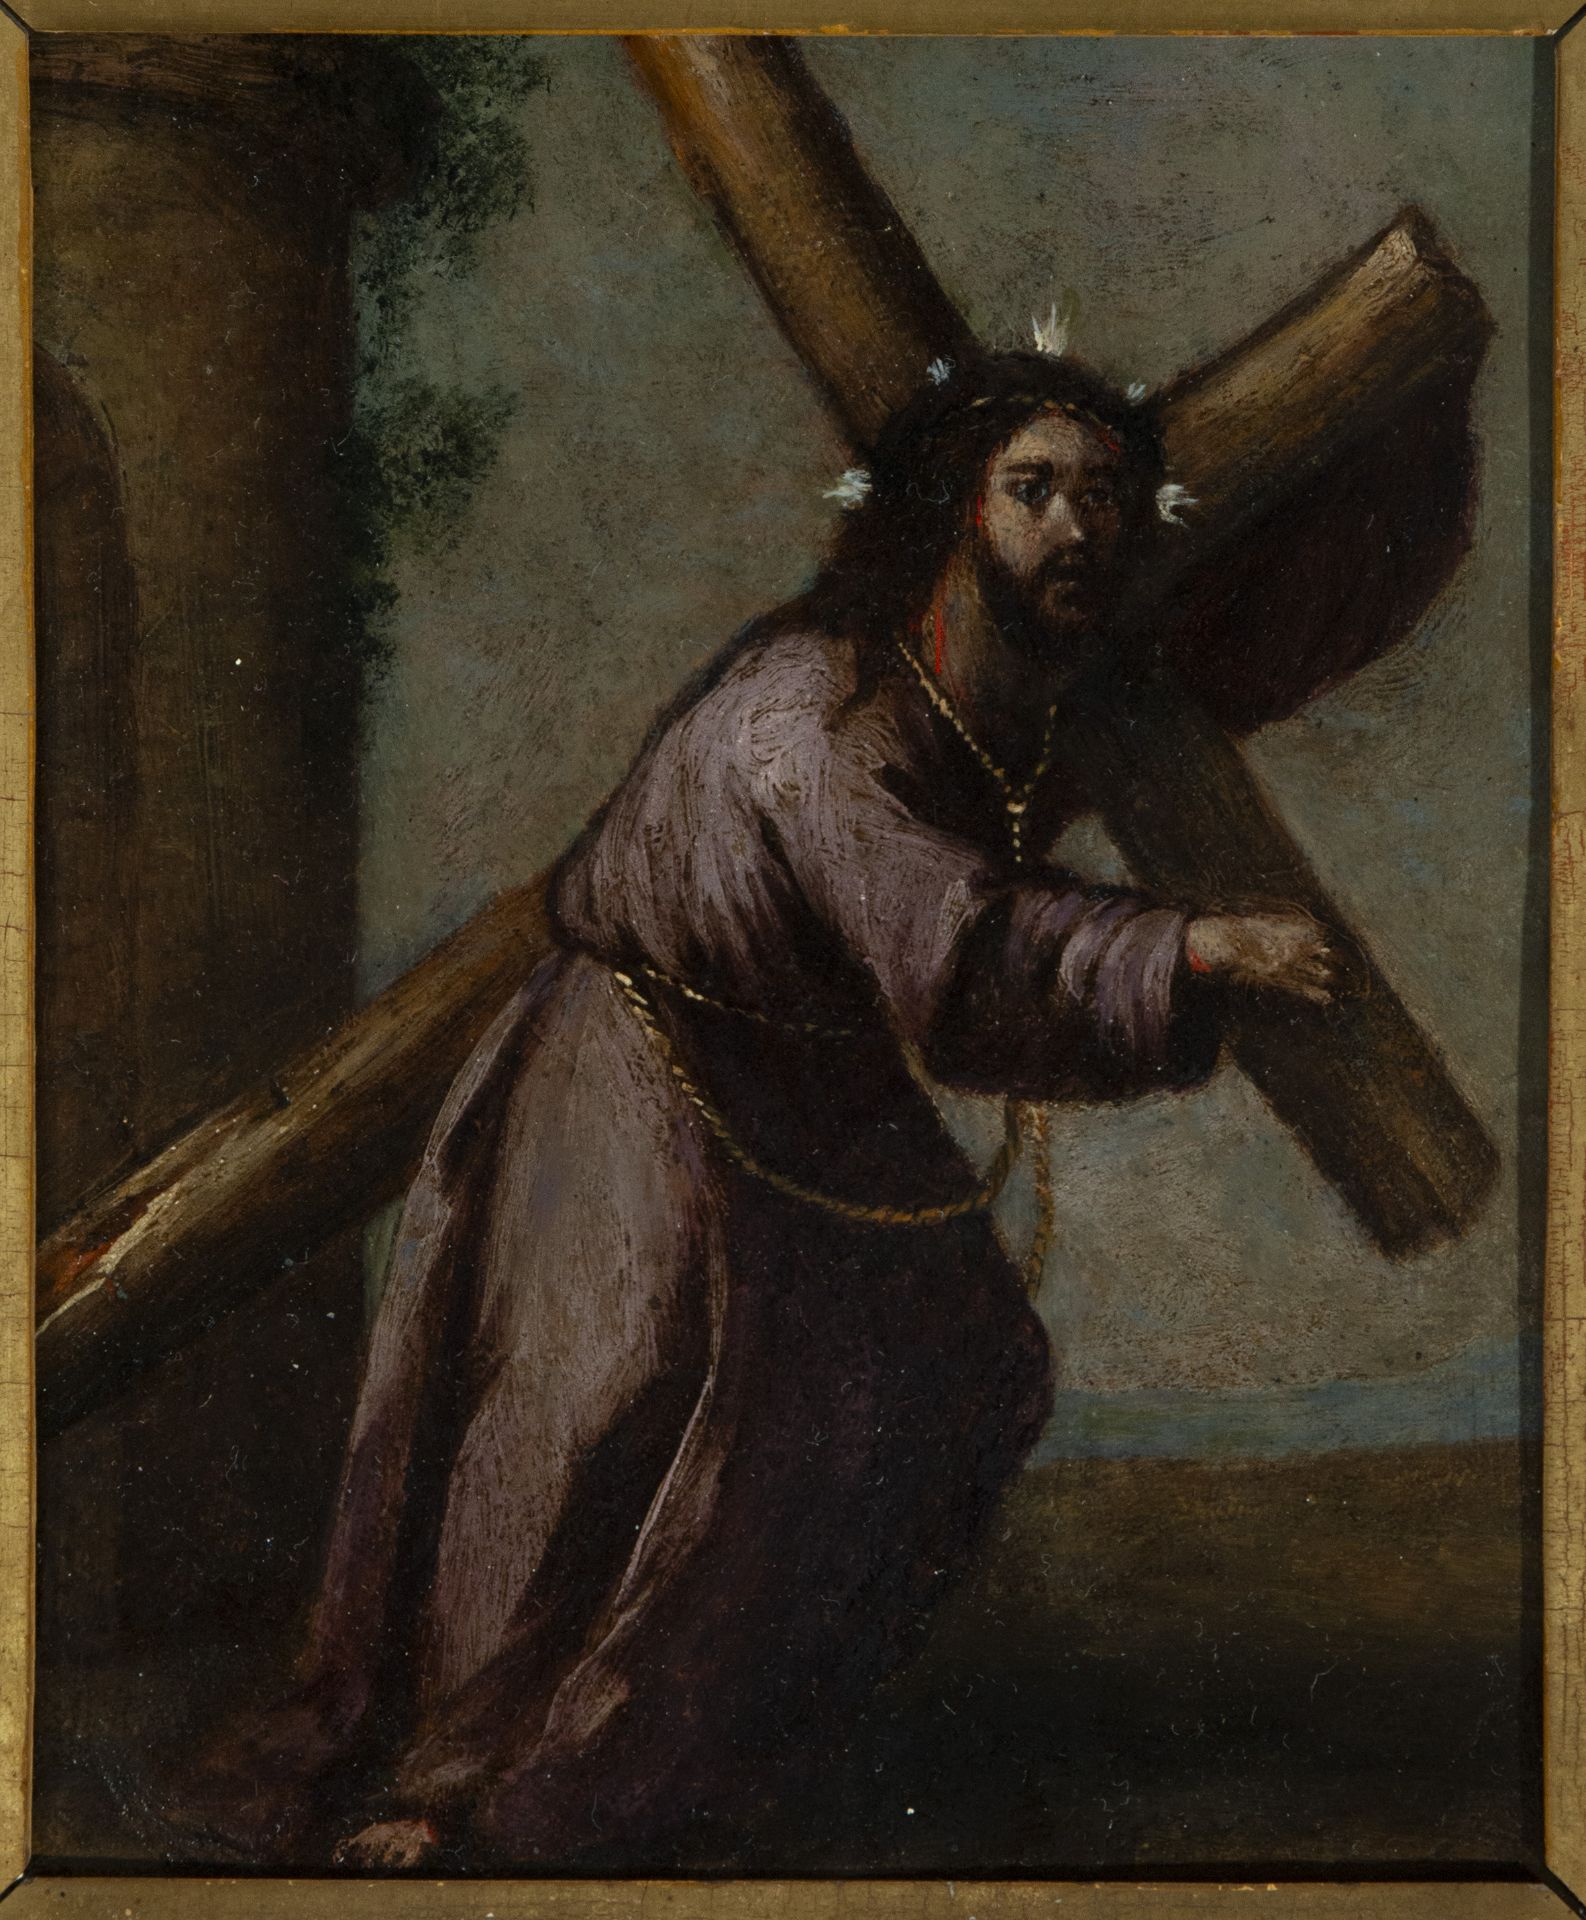 Jesus with the Cross on His Back, colonial work from the 18th century - Bild 2 aus 3